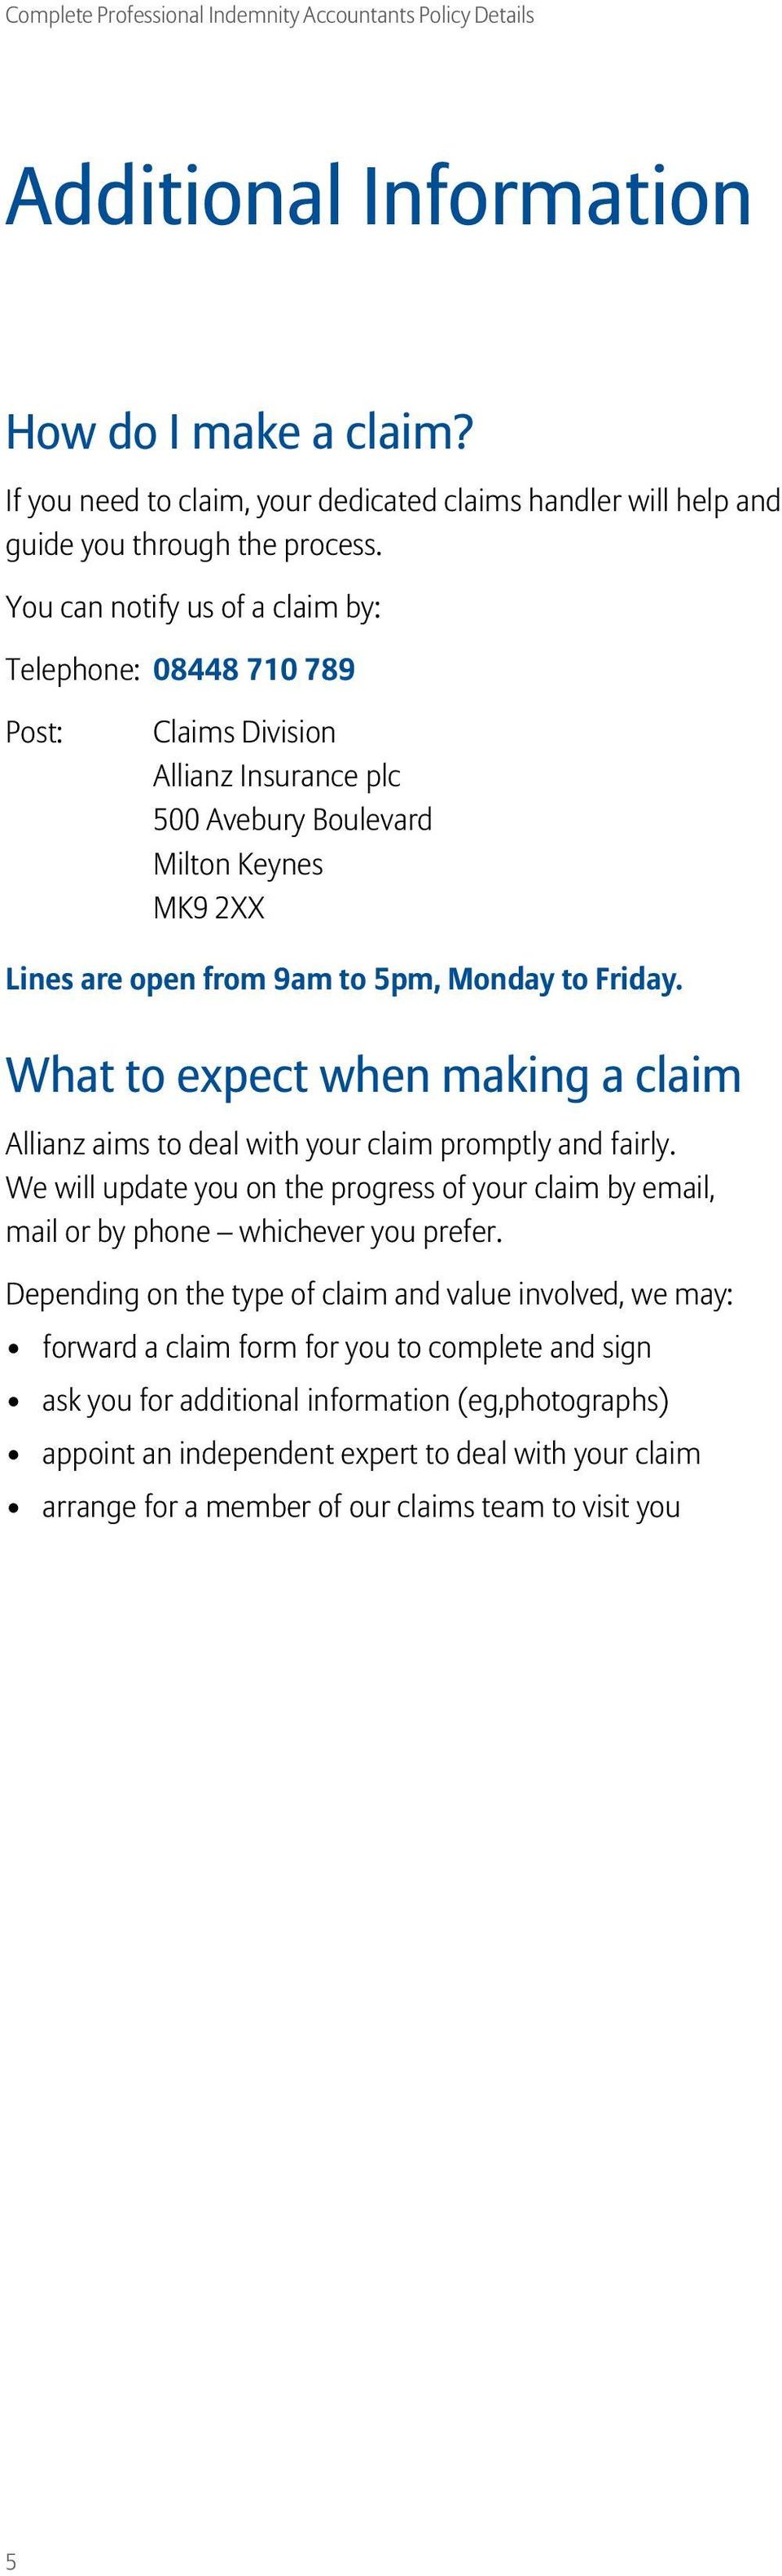 What to expect when making a claim Allianz aims to deal with your claim promptly and fairly. We will update you on the progress of your claim by email, mail or by phone whichever you prefer.